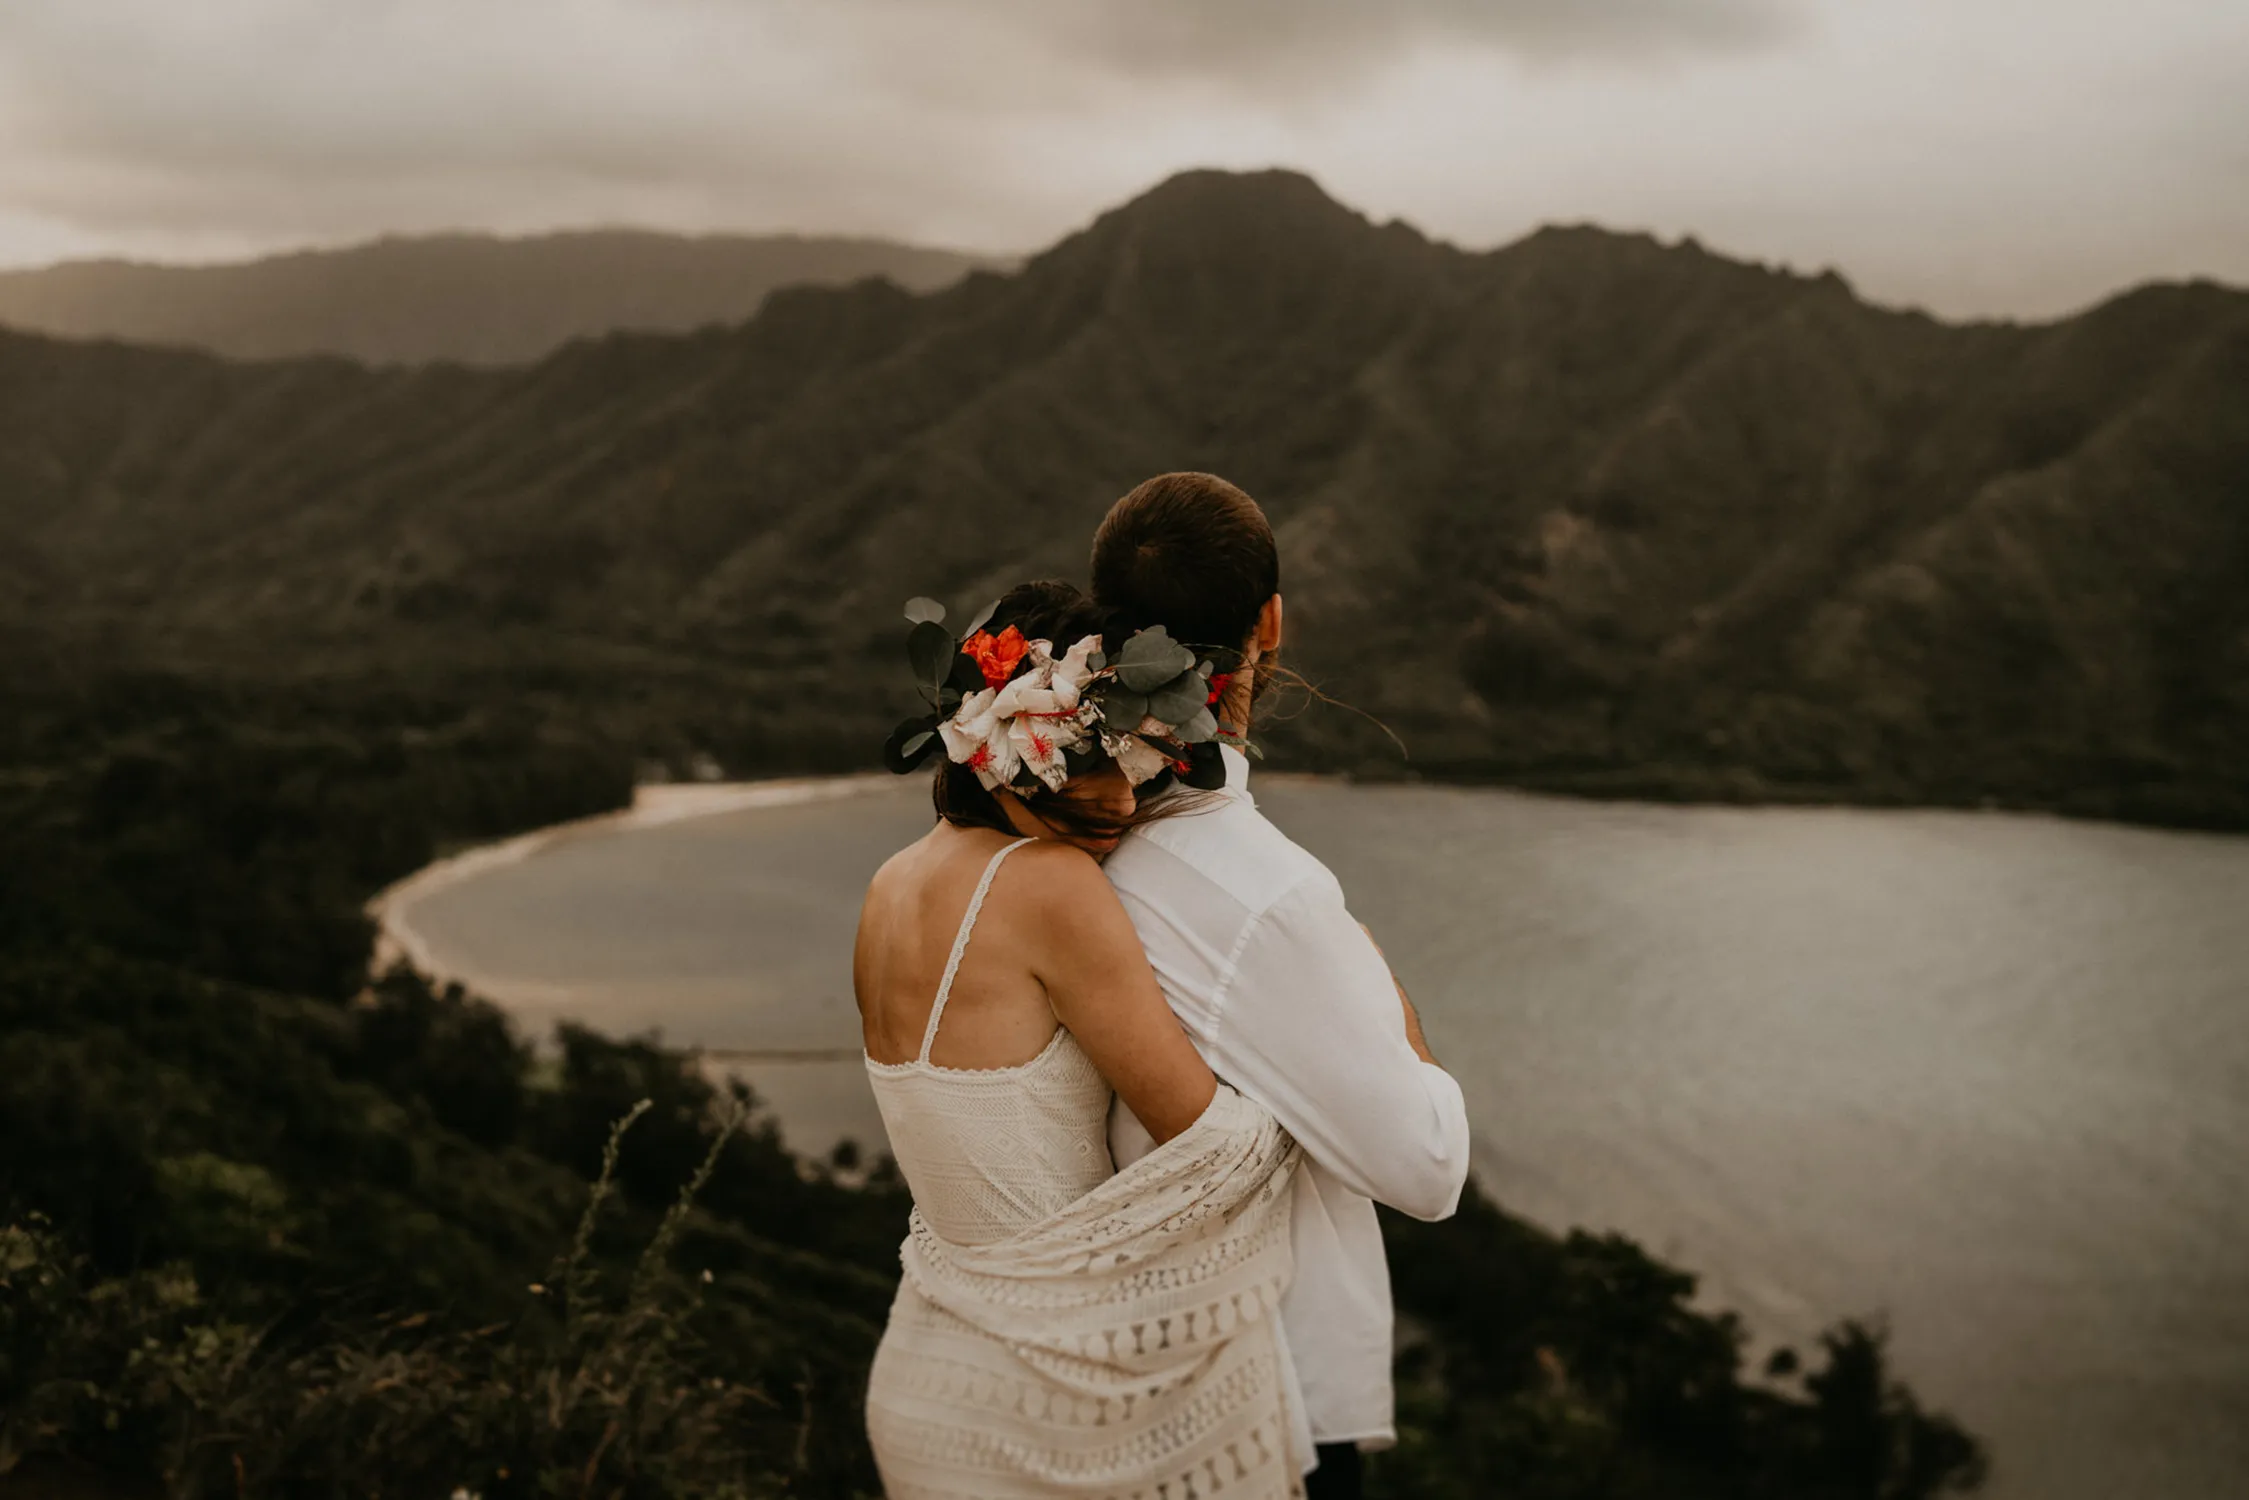 A serene scene captured by Henry Tieu, among the Top Wedding Photographers of 2024, depicts a bride with a vibrant floral crown embracing her partner, with the sweeping panorama of a mountainous landscape and tranquil bay behind them, evoking a sense of intimate connection in a grand natural setting.